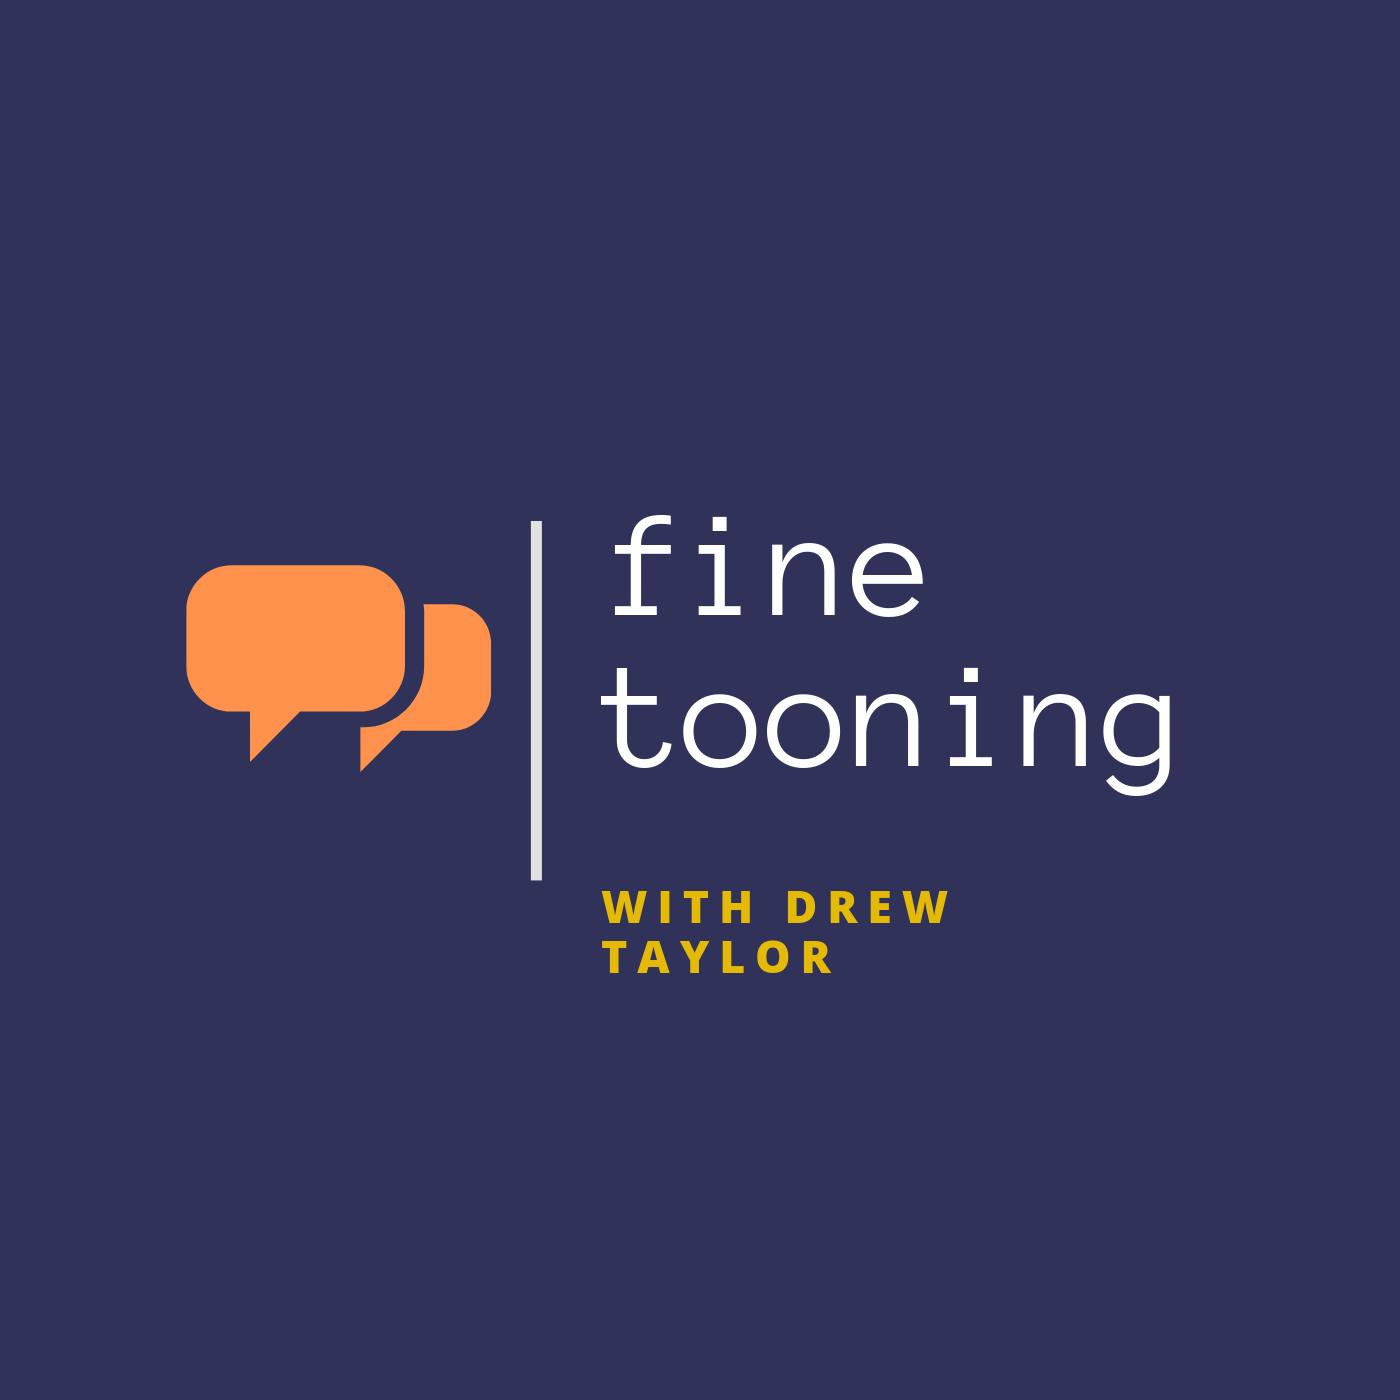 Fine Tooning with Drew Taylor - Episode 130: How the director of “Space Jam” carved out a new legacy